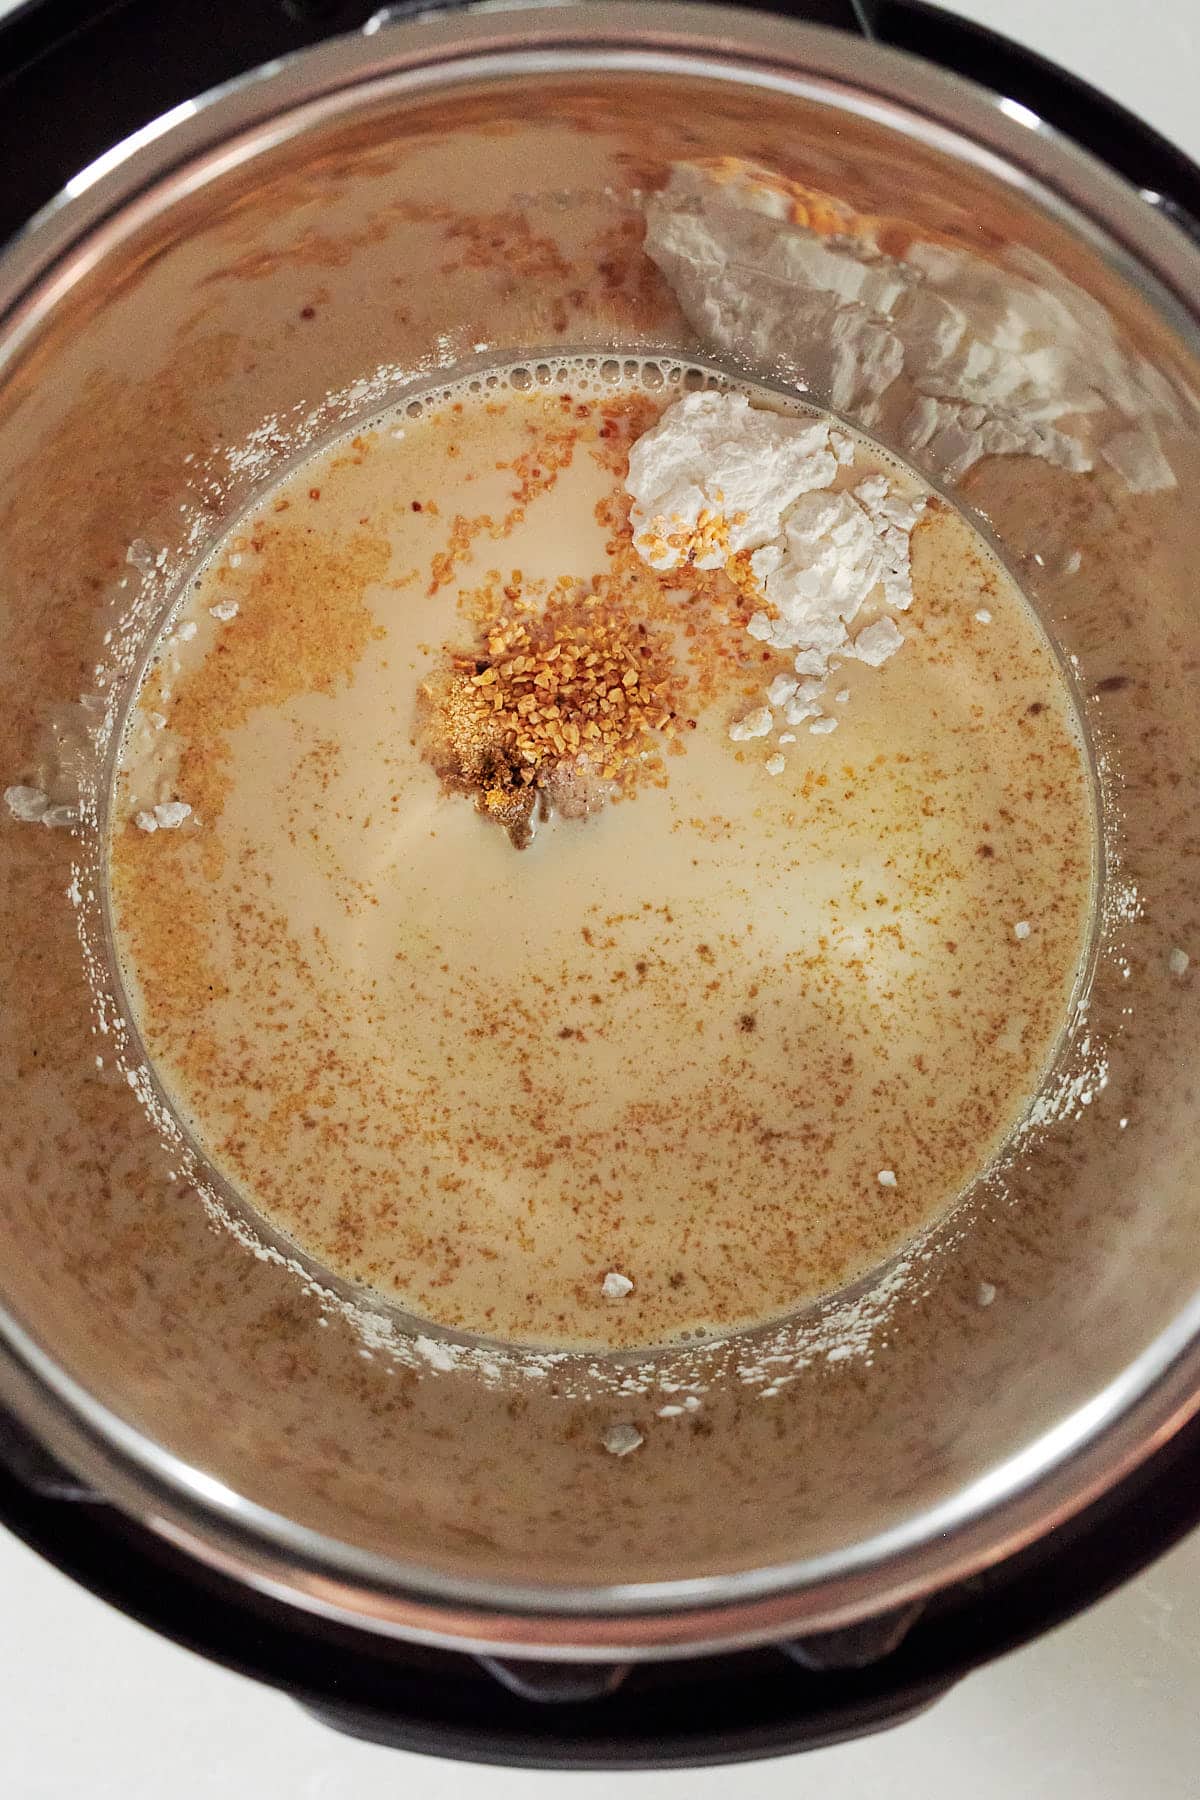 Evaporated milk and spices for cheese dip in the Instant Pot